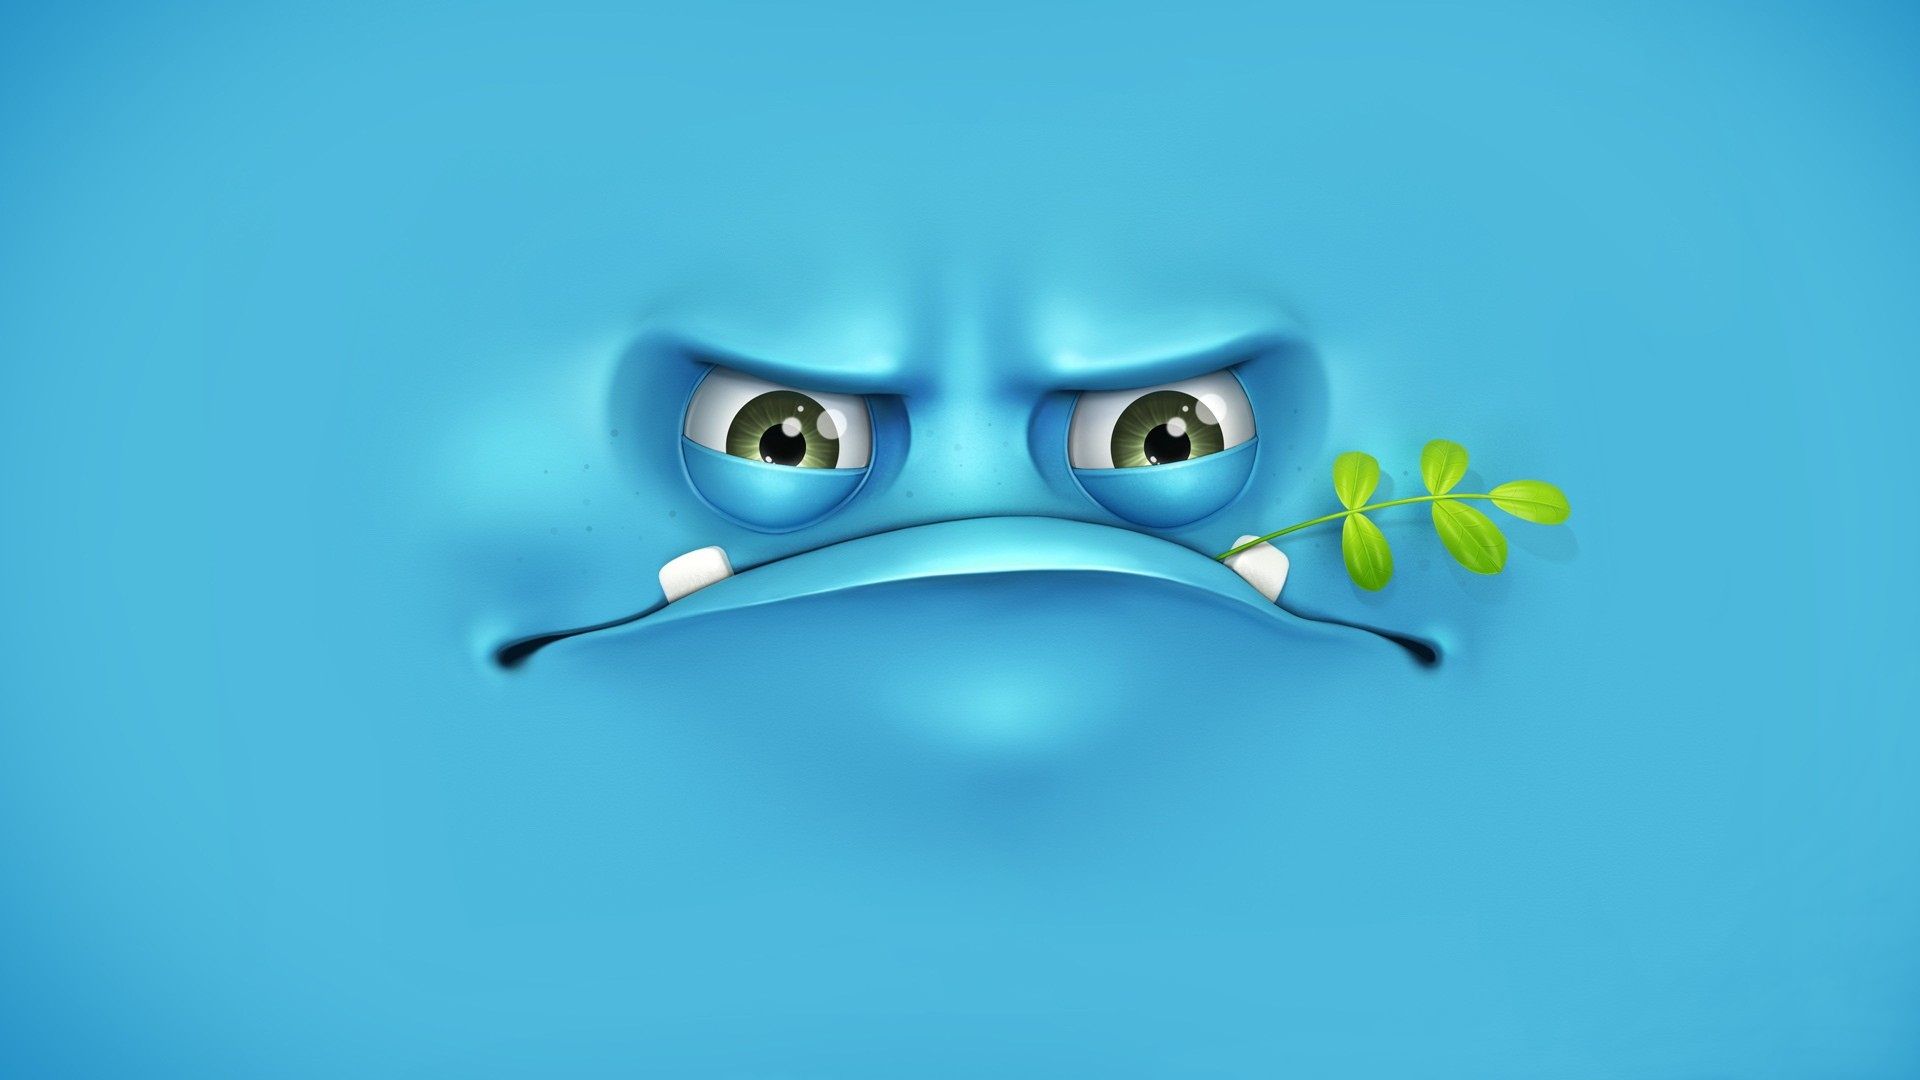 Funny-Angry-Faces-Wallpapers.jpg